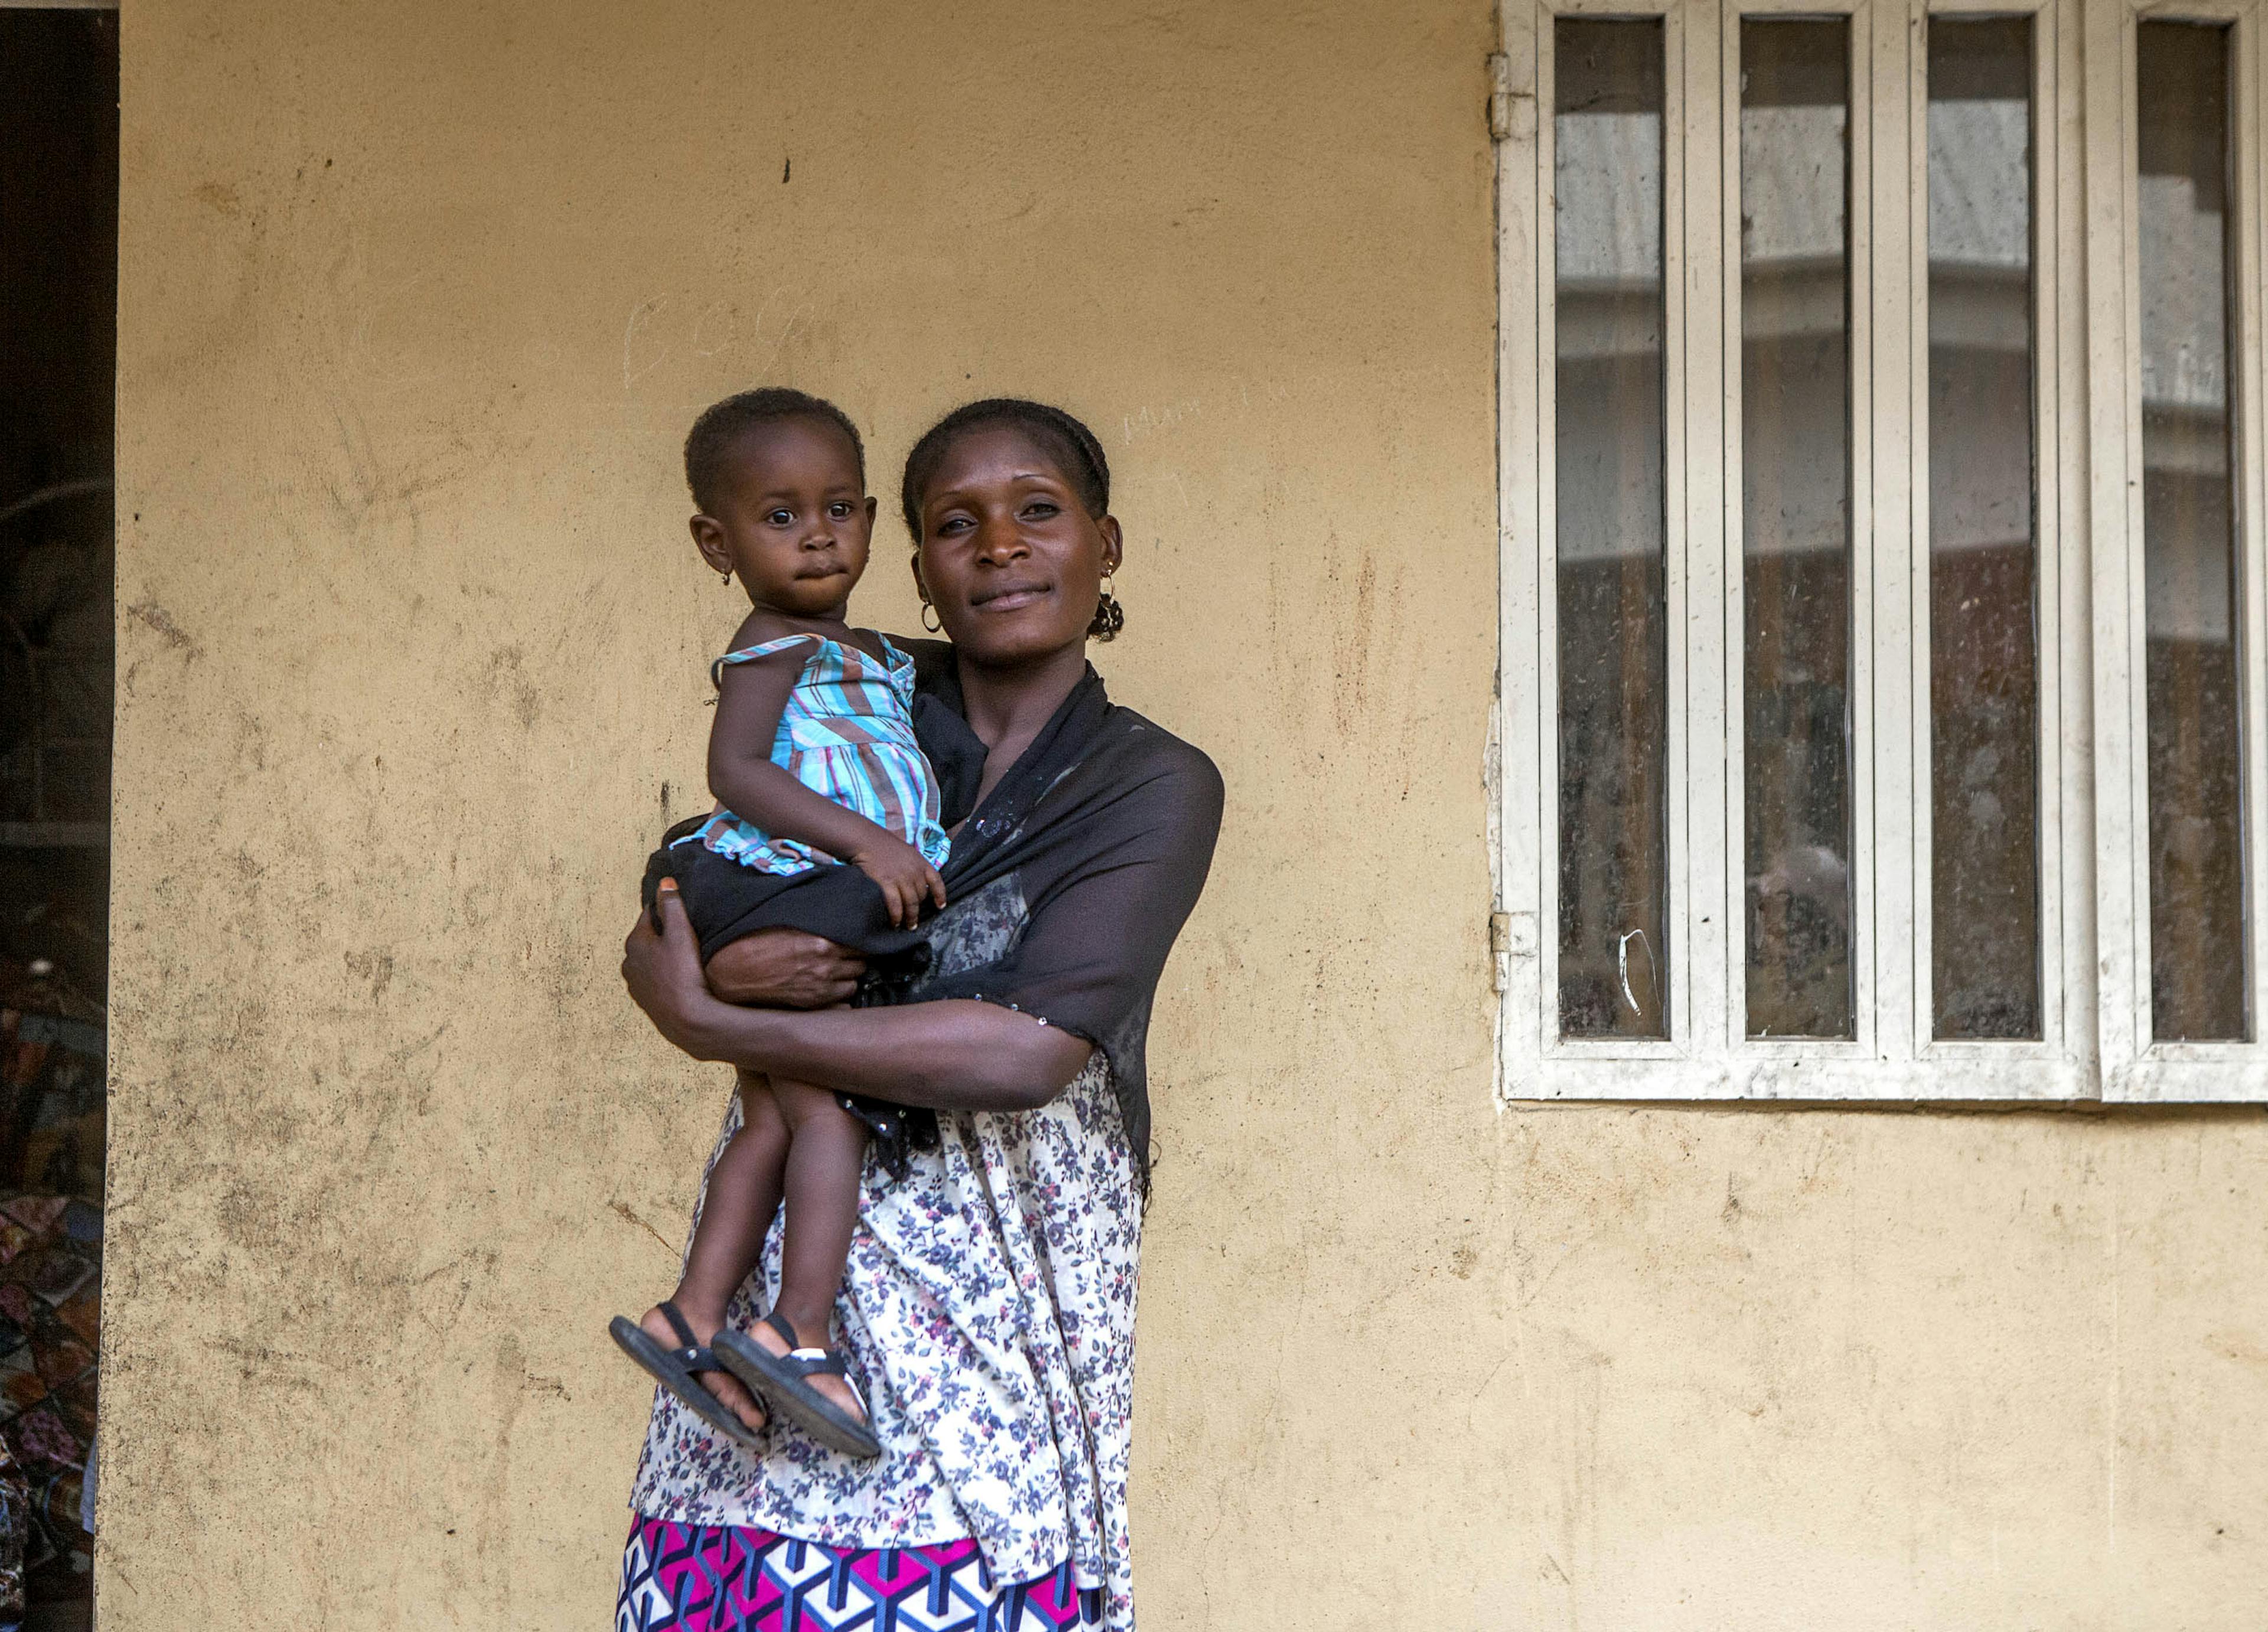 Maryamu rescued her daughter from Boko Haram. She smiles at the camera in front of their home